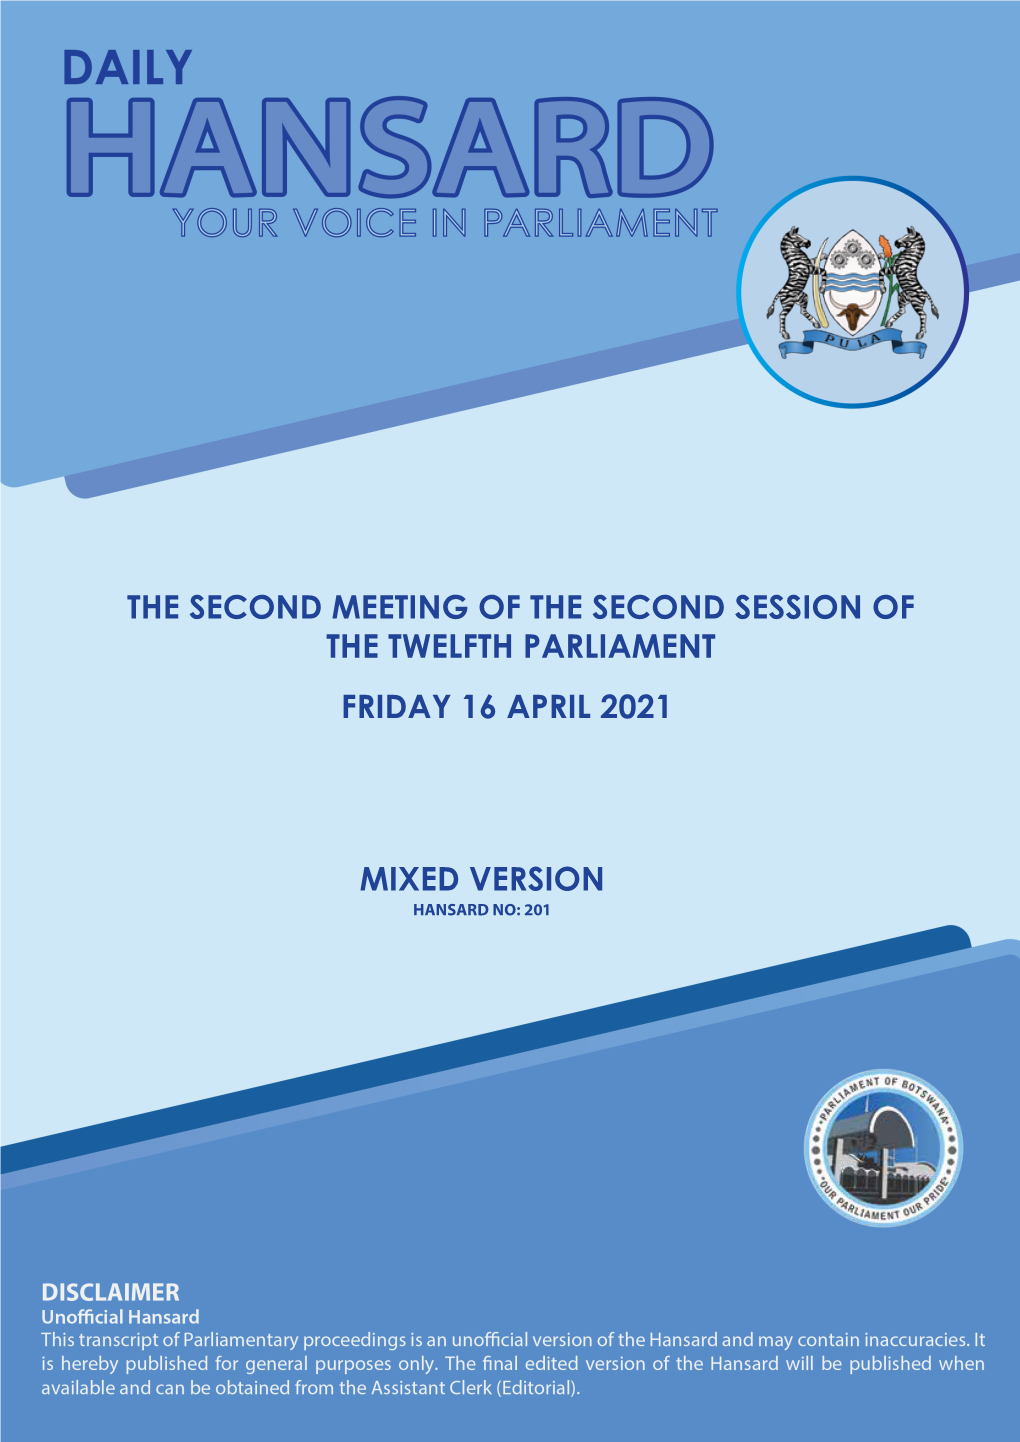 Friday 16 April 2021 the Second Meeting of The